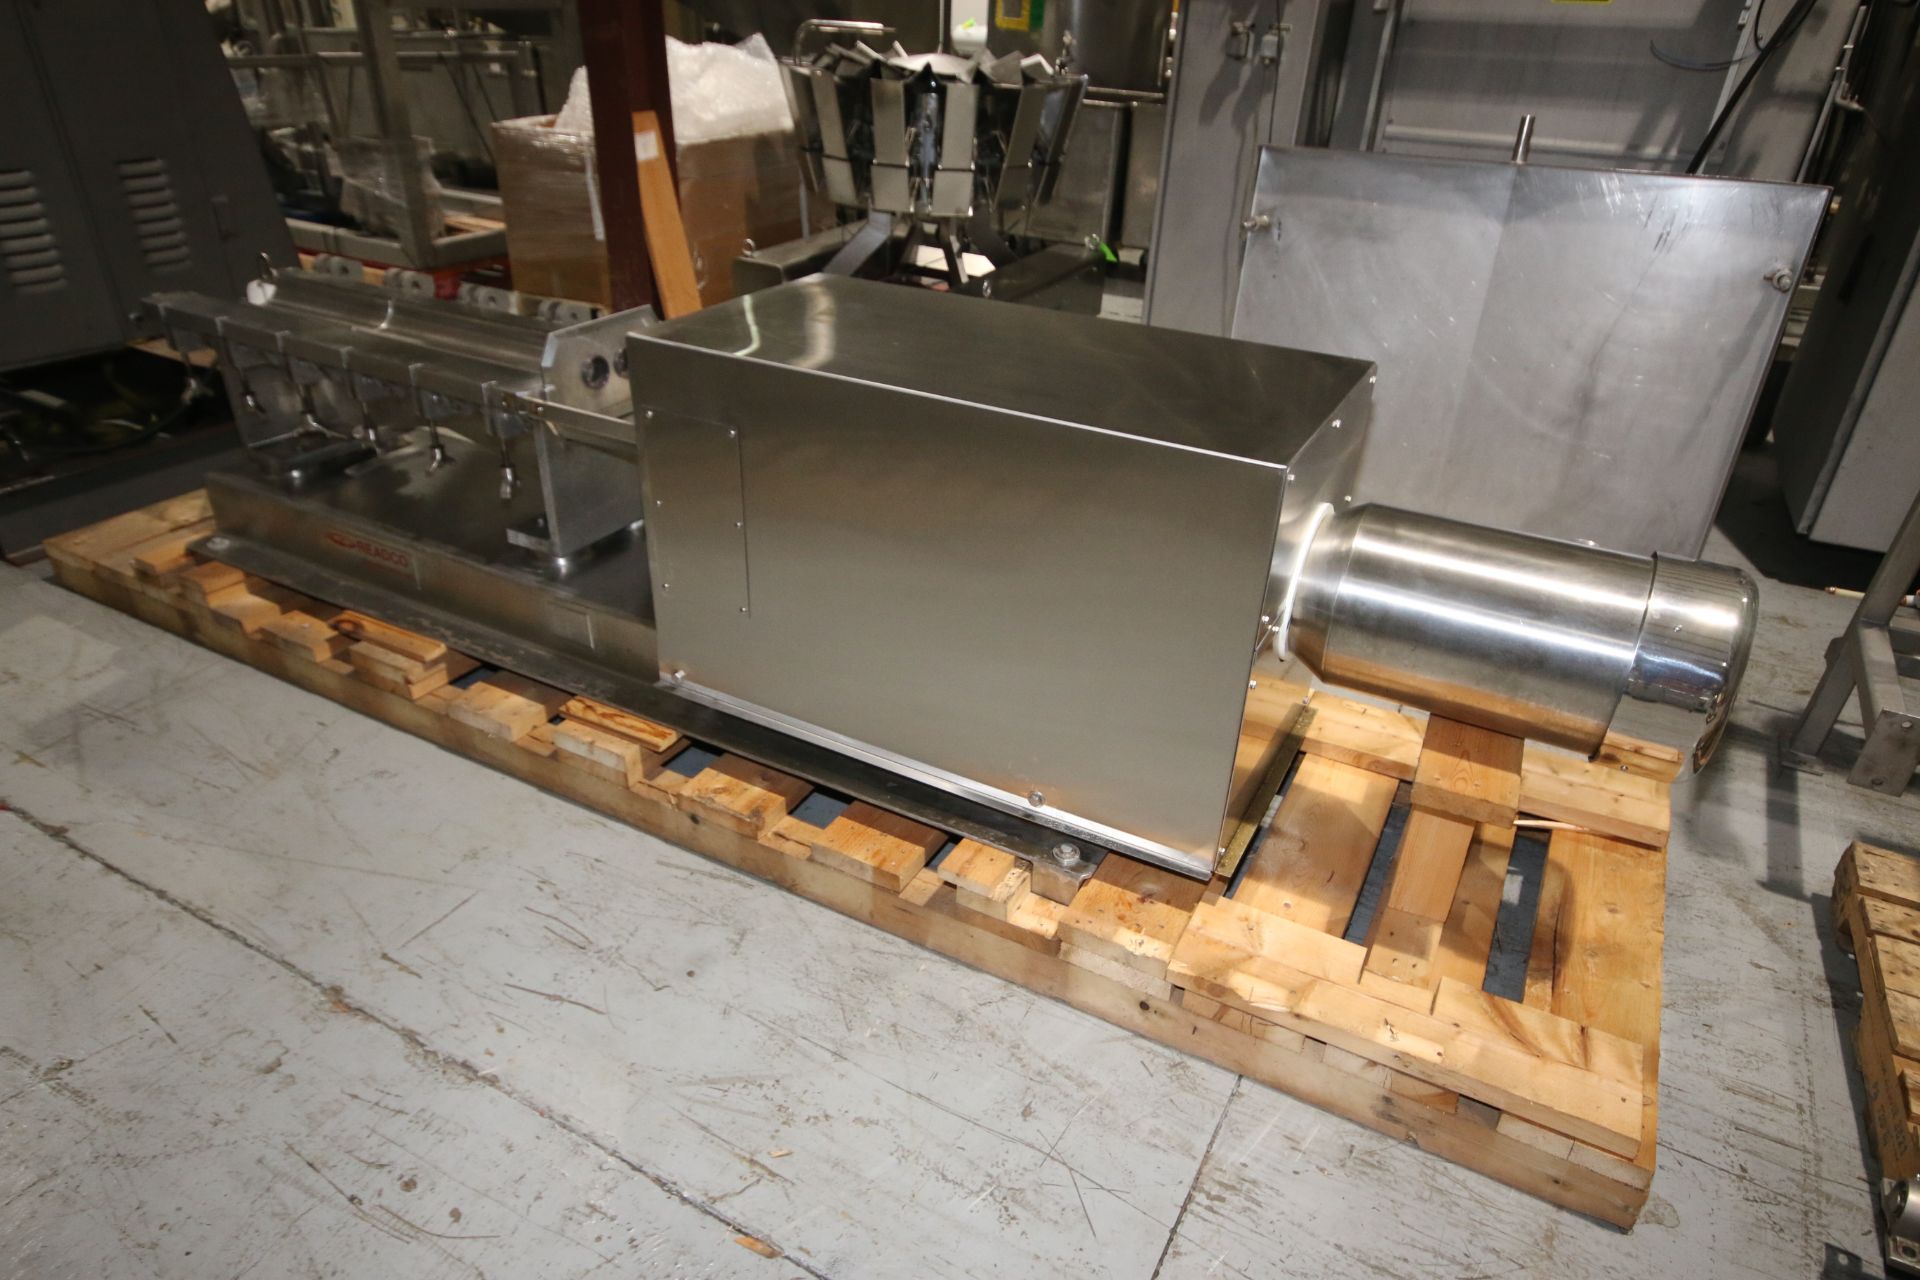 Readco S/S Continuous Mixer, Machine: 5 C.P., S/N 108512, Weight: 3,300 lbs, P.O. Number: - Image 2 of 10